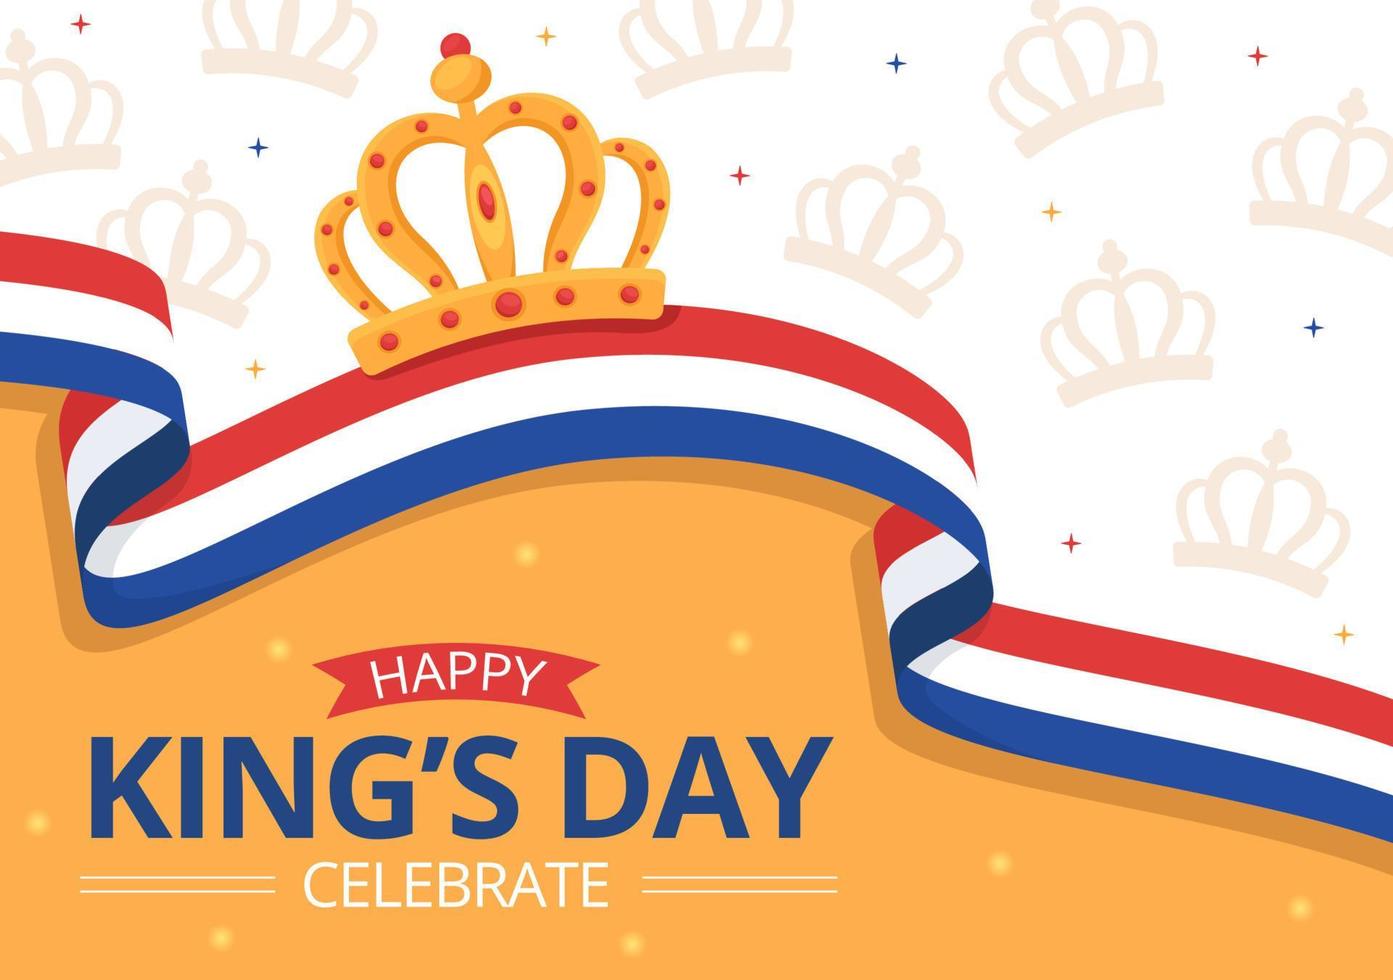 Happy Kings Netherlands Day Illustration with Waving Flags and King Celebration for Web Banner or Landing Page in Flat Cartoon Hand Drawn Templates vector